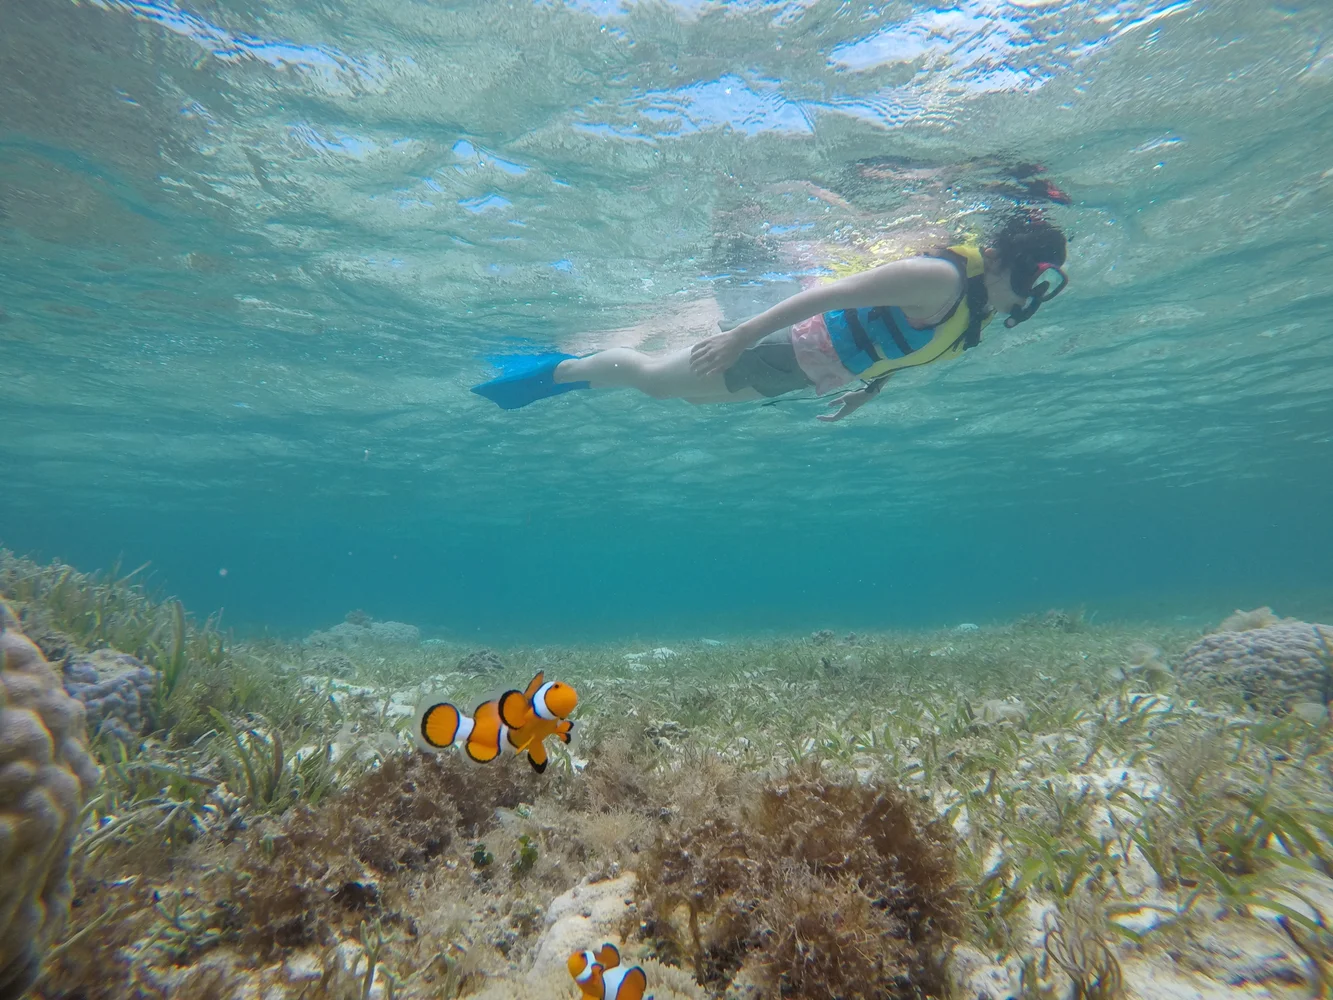 Okinawa Snorkeling & SUP — Water Sports Experience in Bise